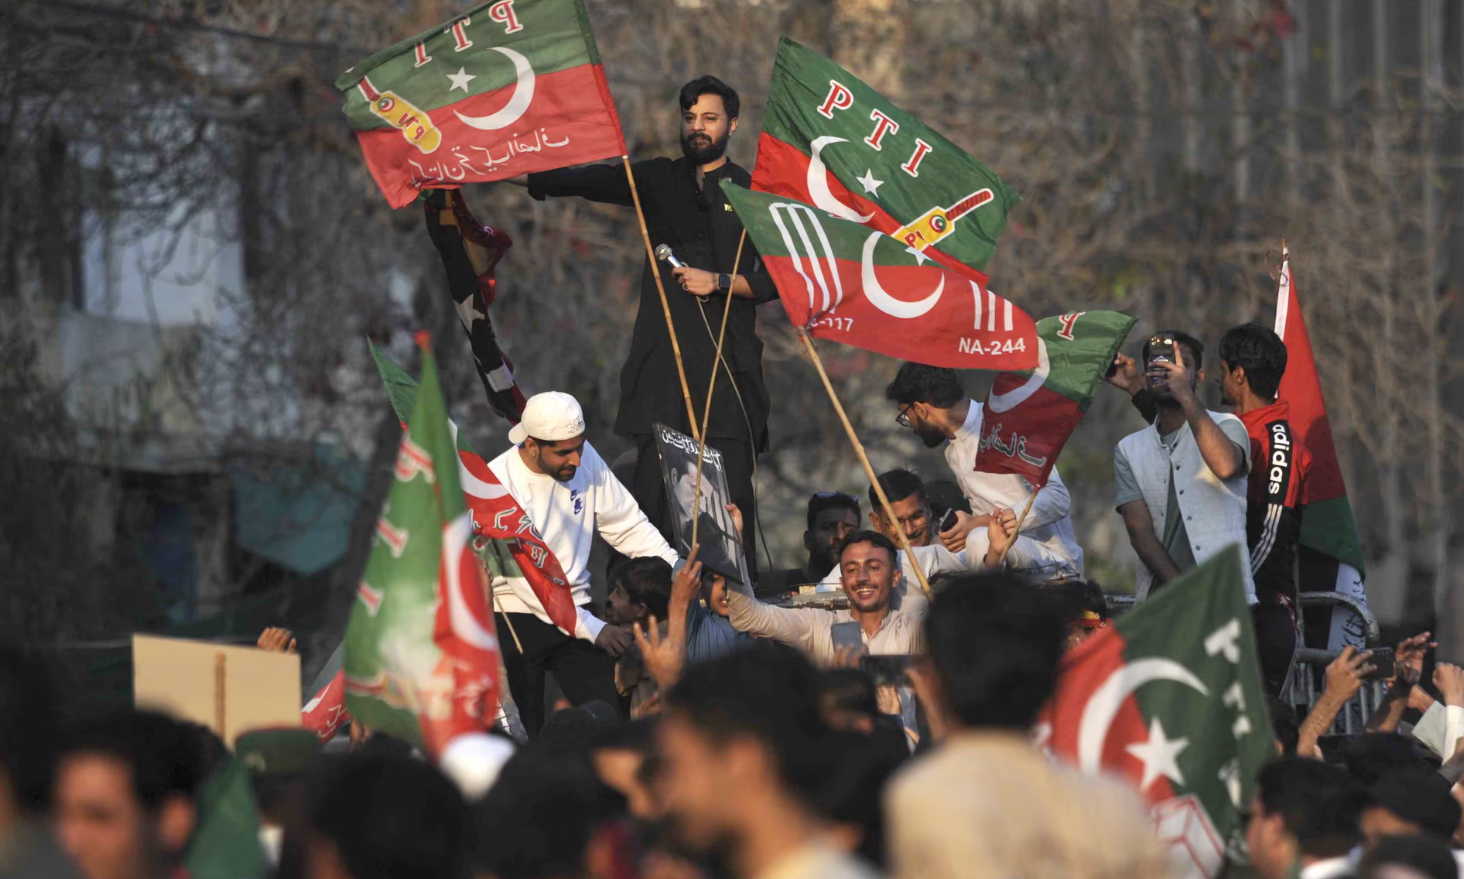 Protests take place across Pakistan amid election vote-rigging allegations